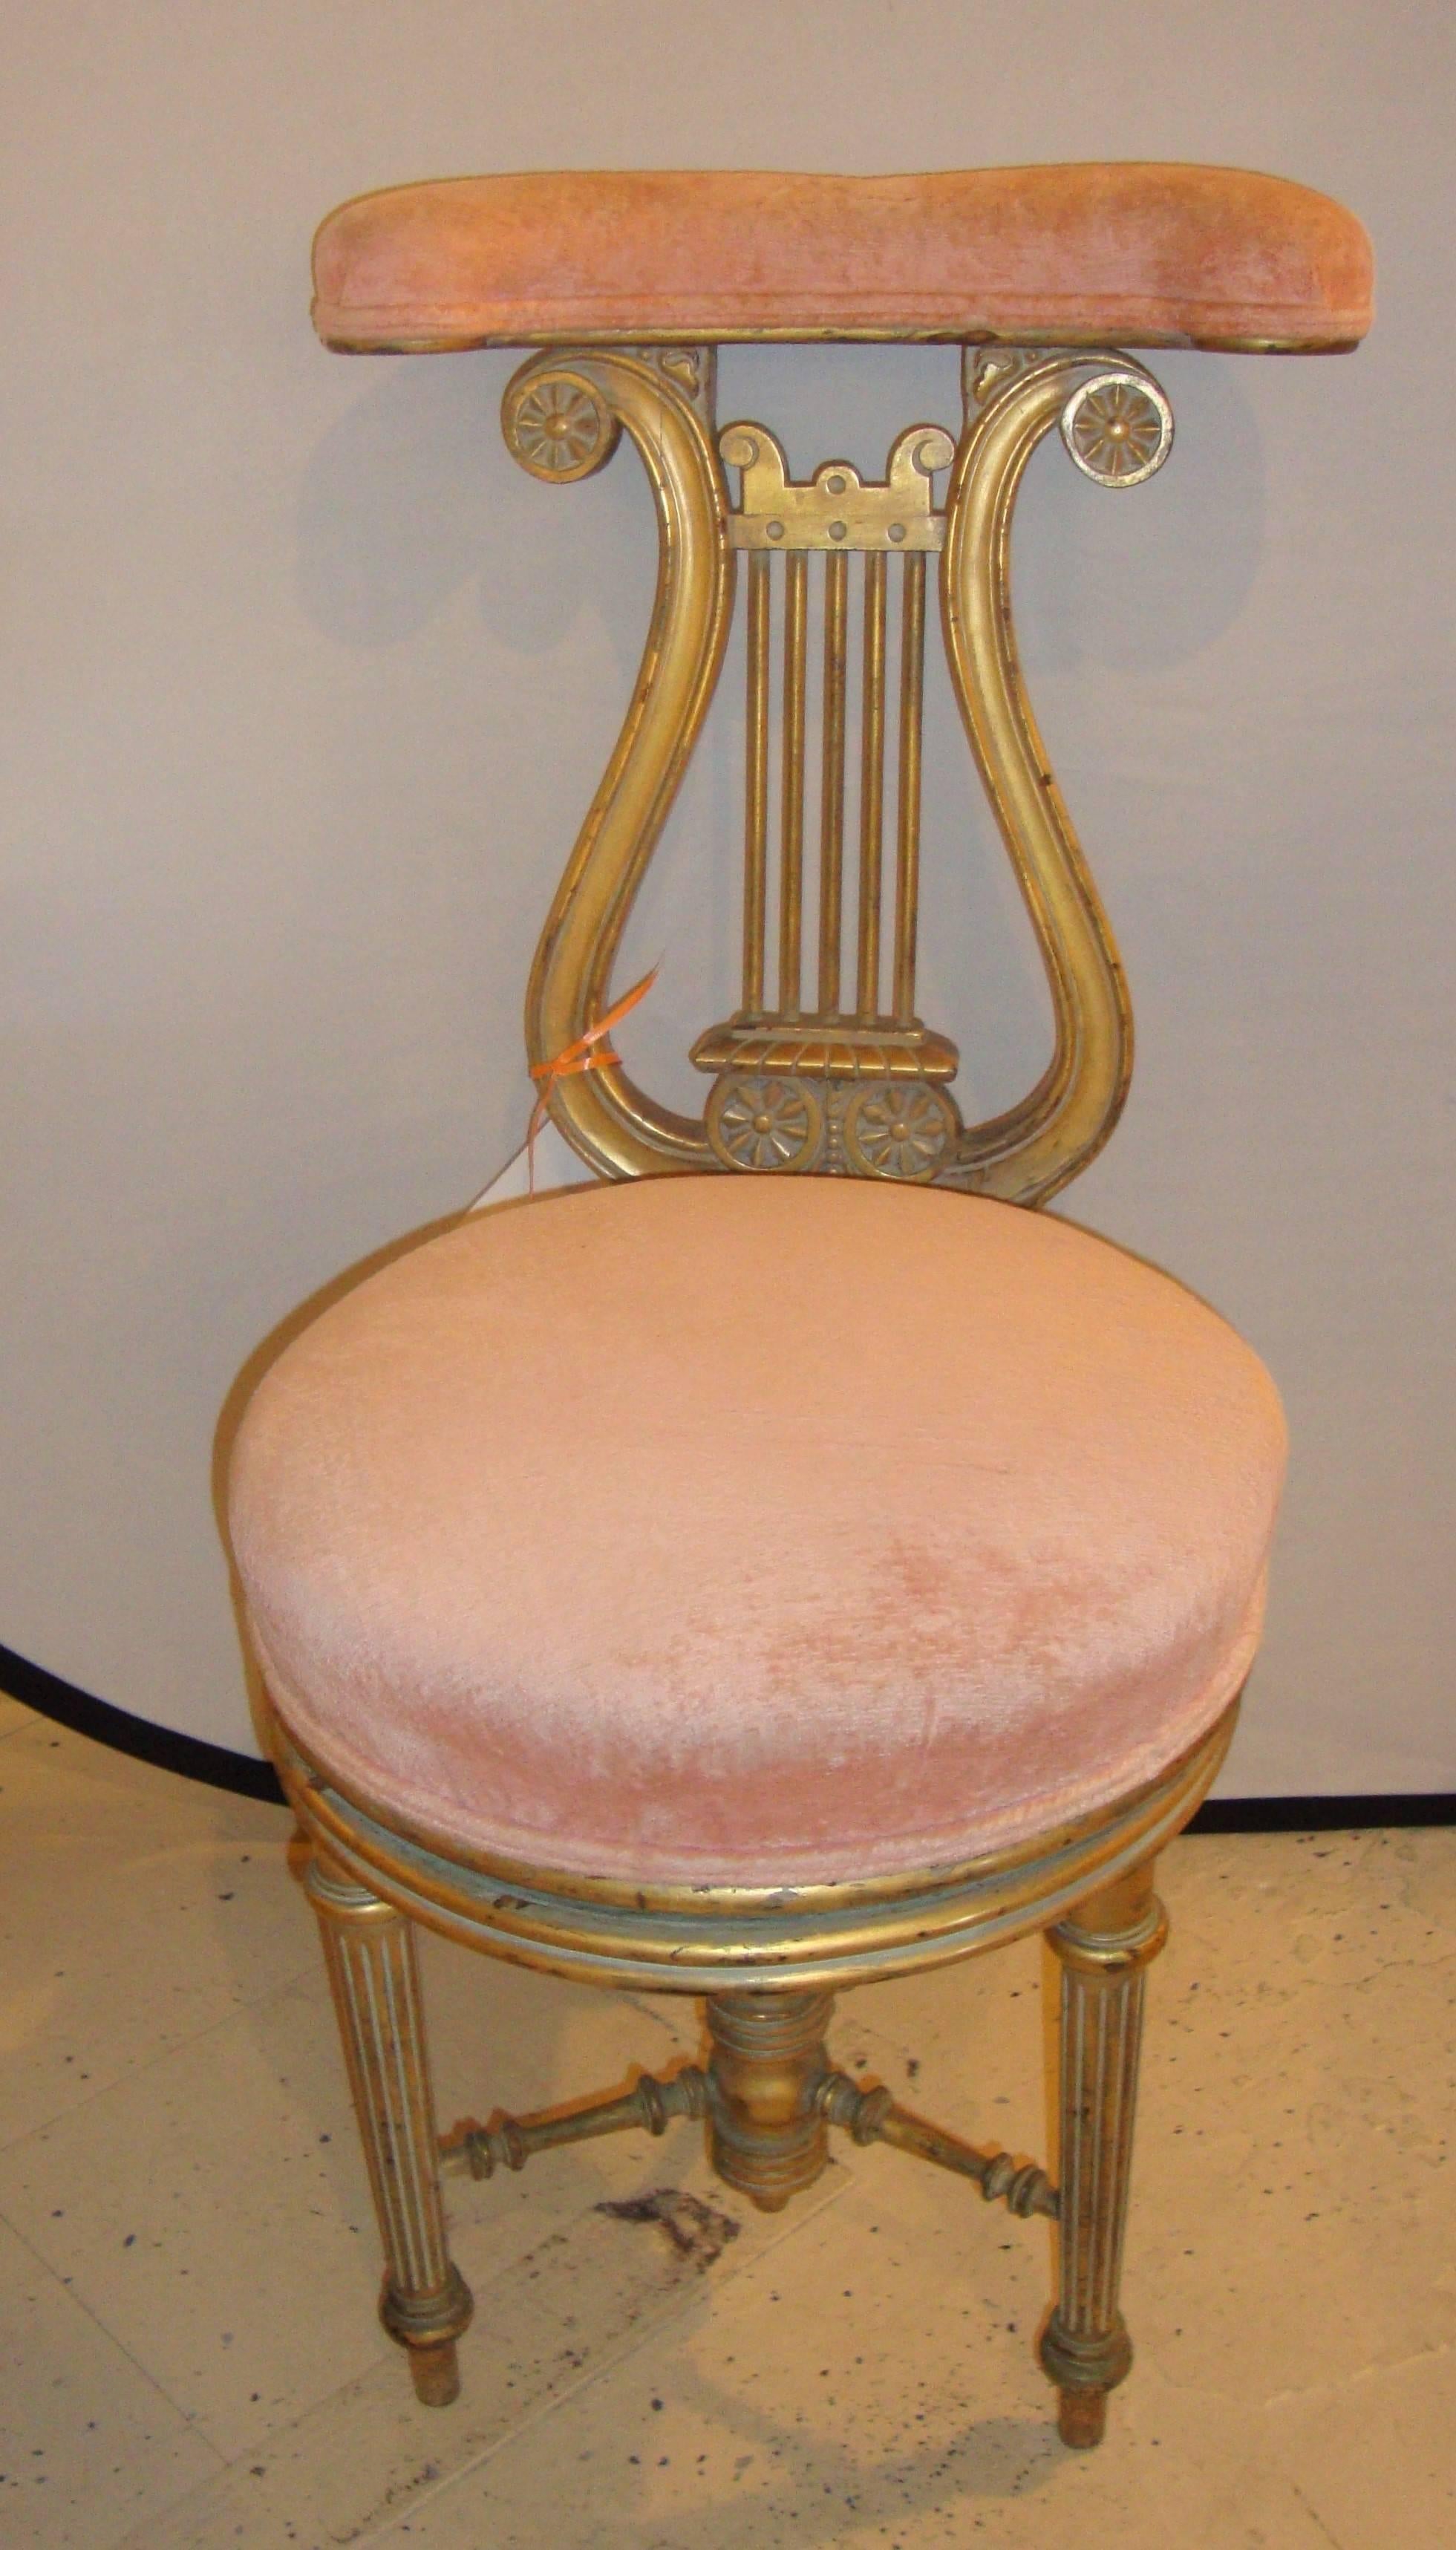 Victorian adjustable lyre gold harp piano chair.

Measures: Seat height 18 inches.